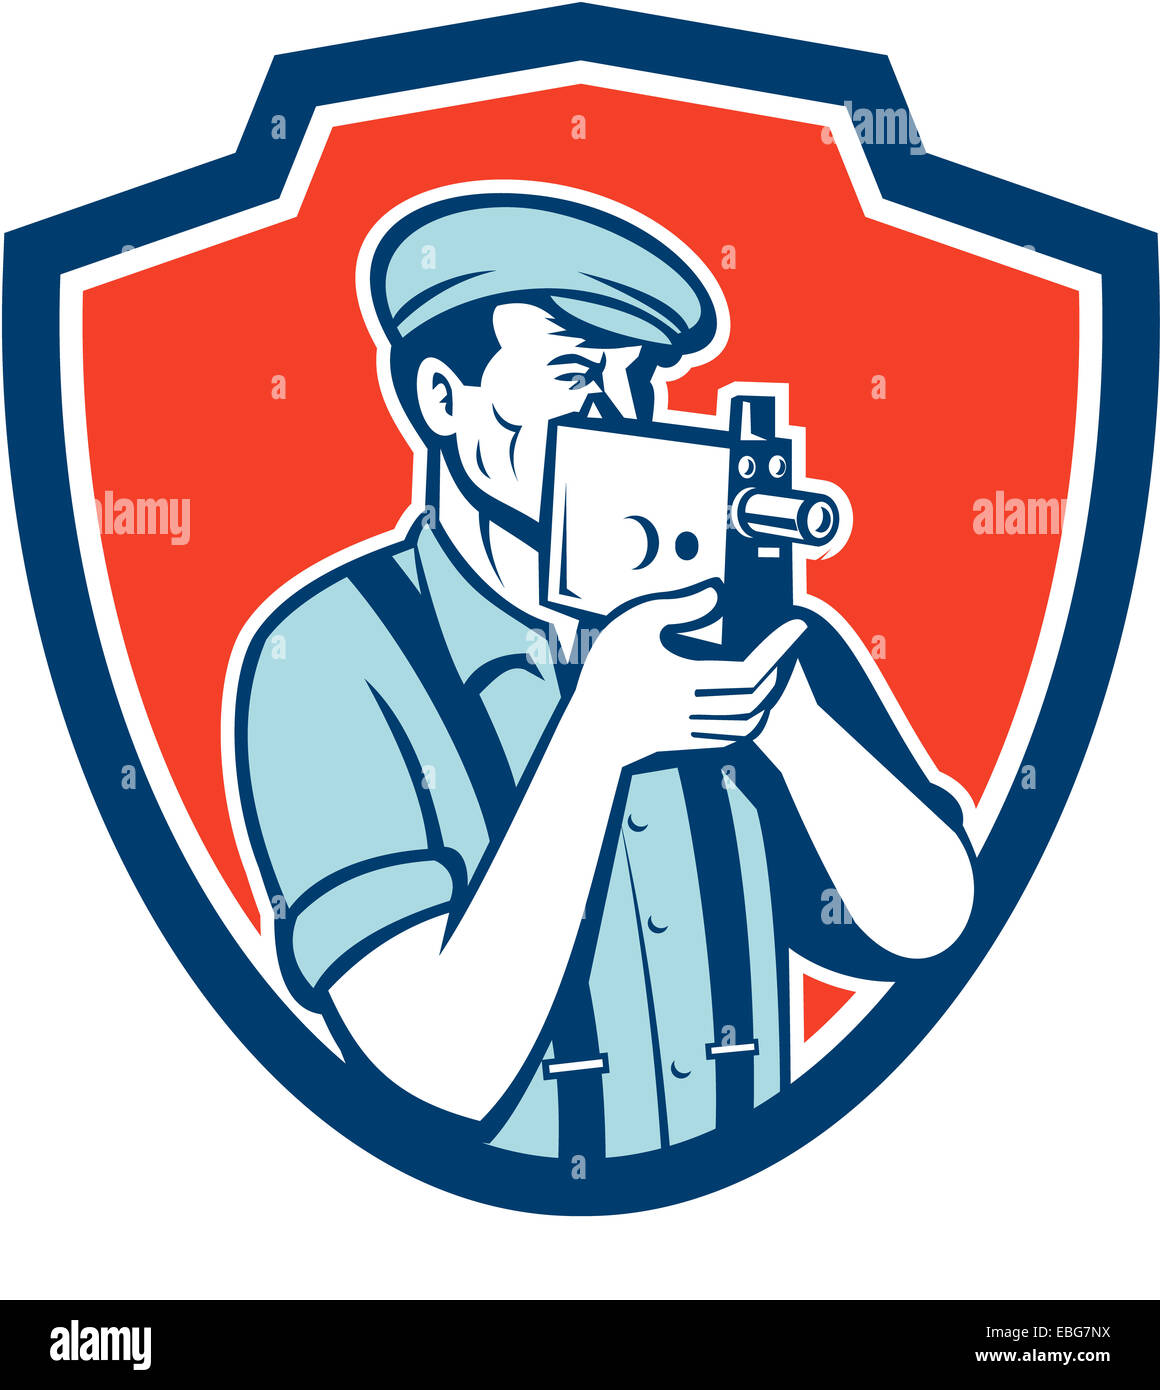 Illustration of a photographer wearing hat and suspenders shooting aiming with vintage camera set inside shield crest done in retro style. Stock Photo